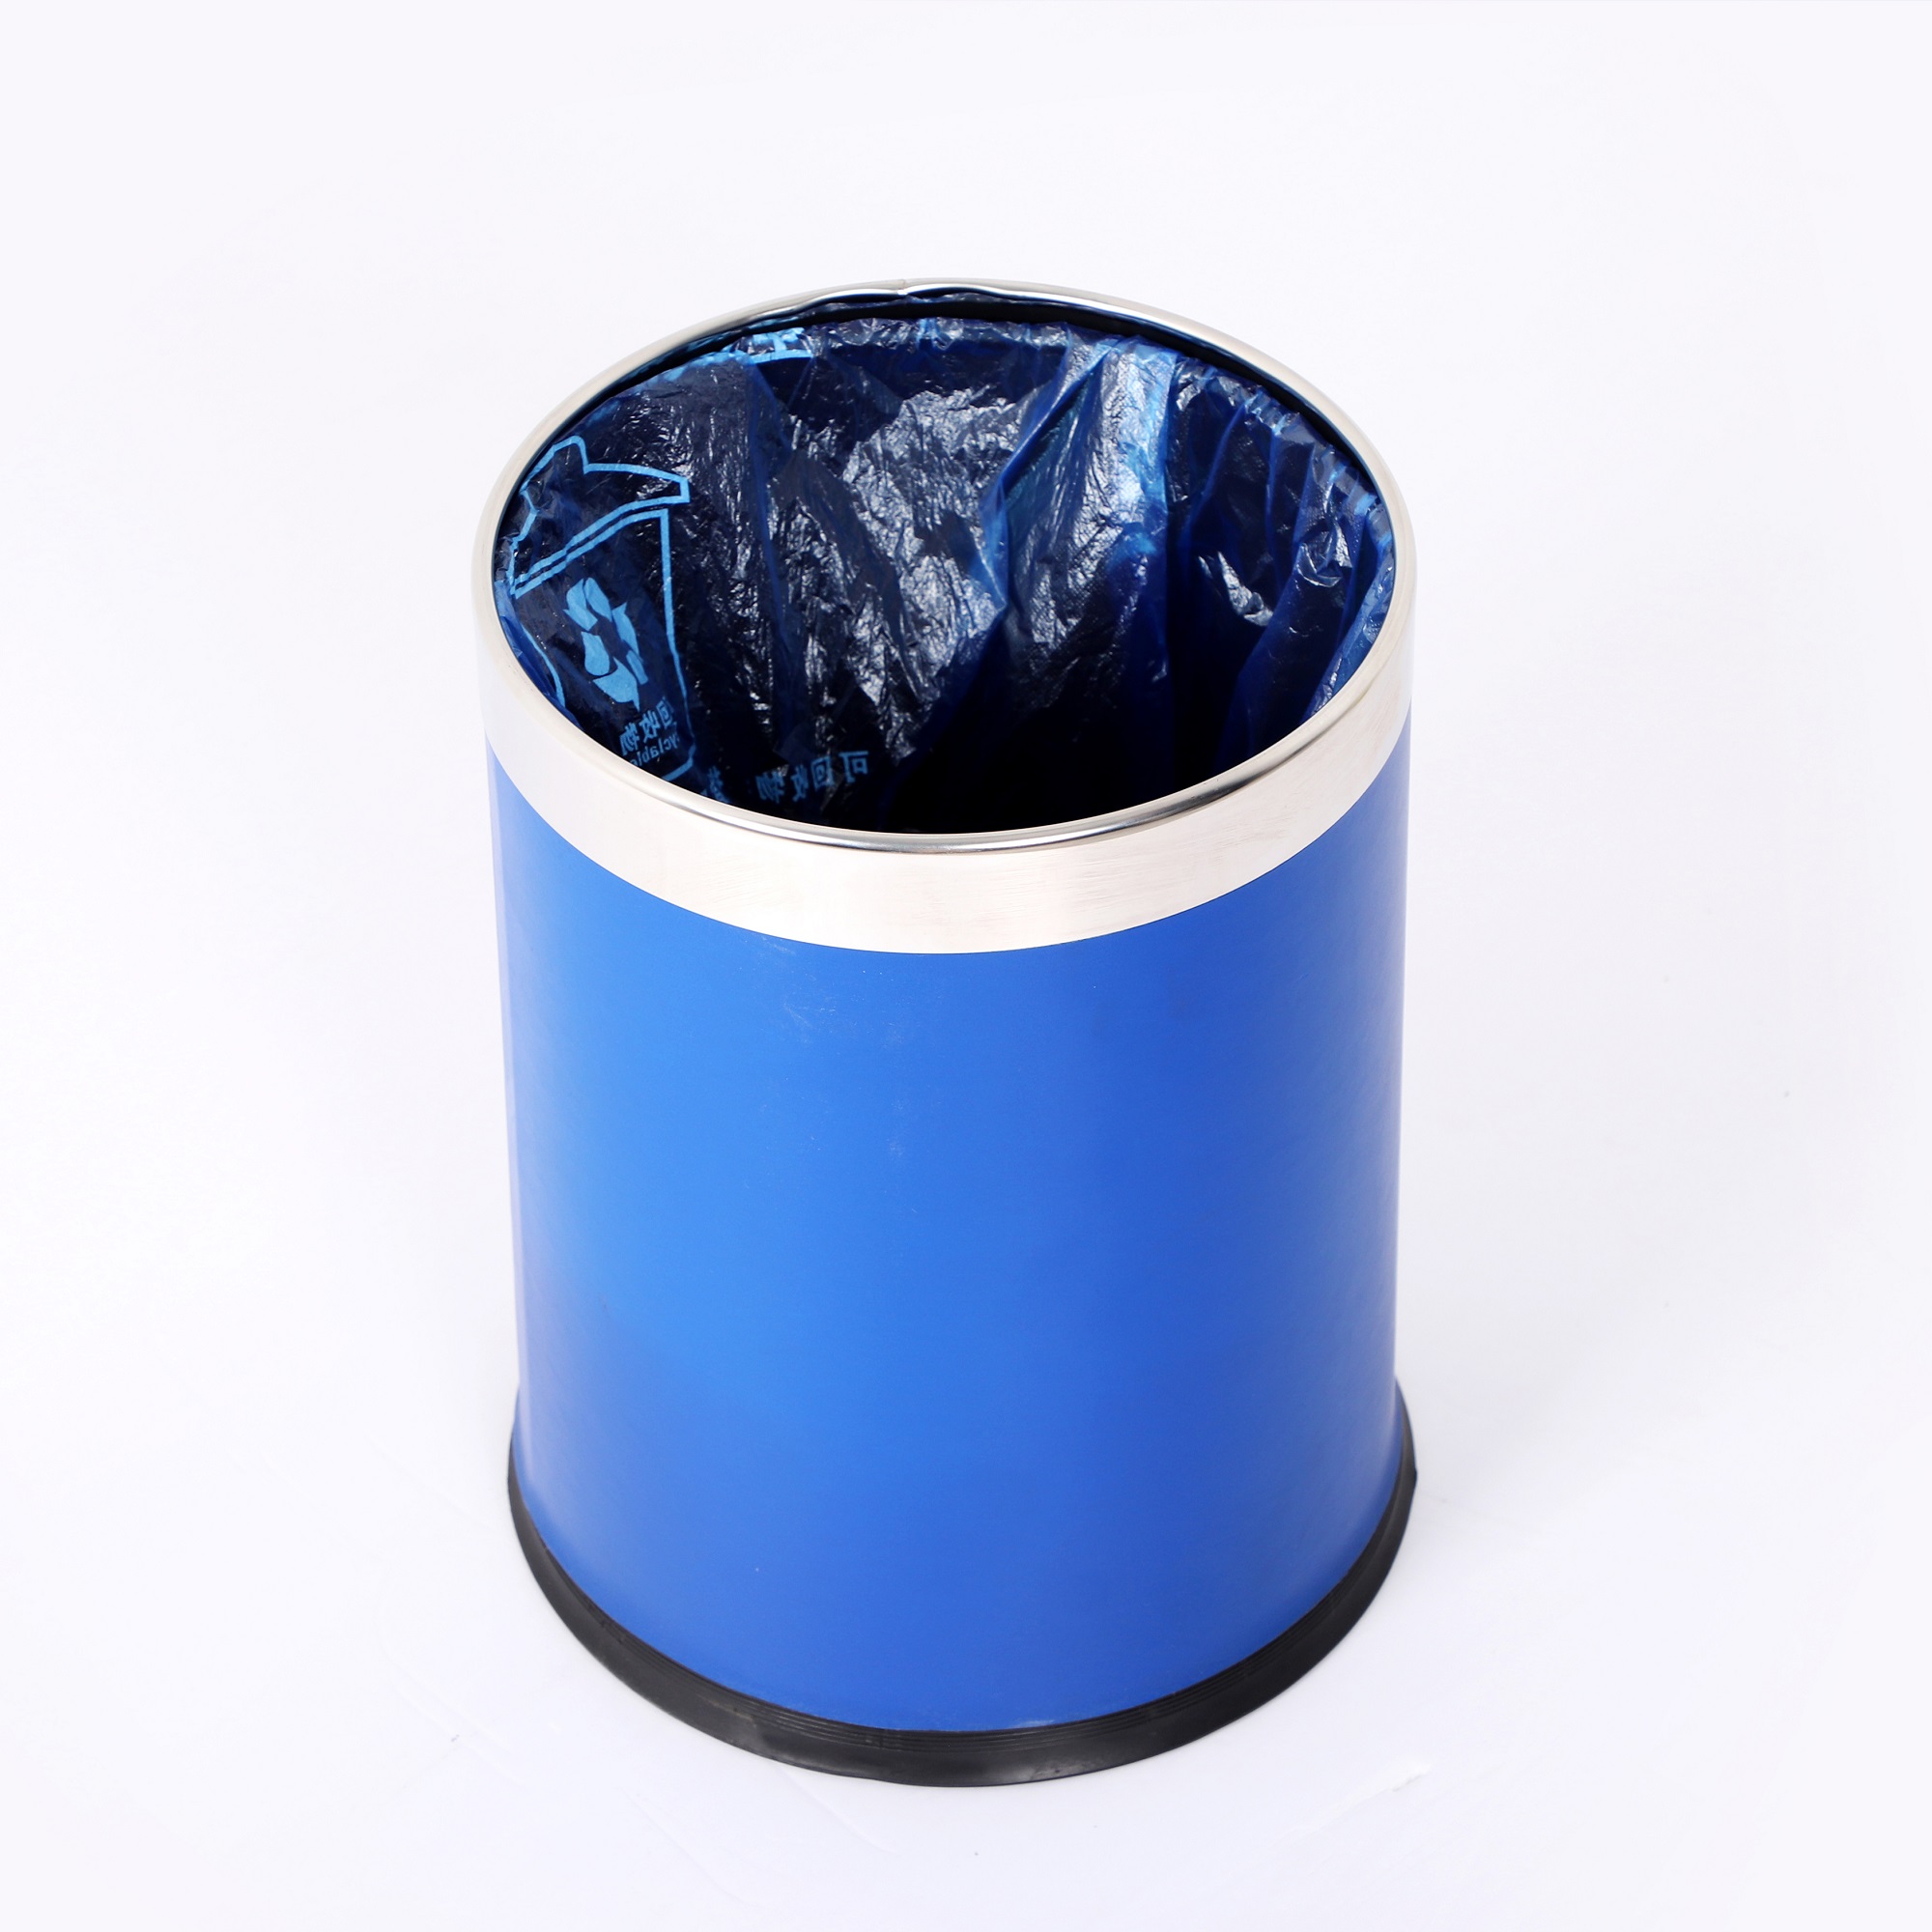  Room Trash Bin with Double Layer in Stock for bedroom KL-06